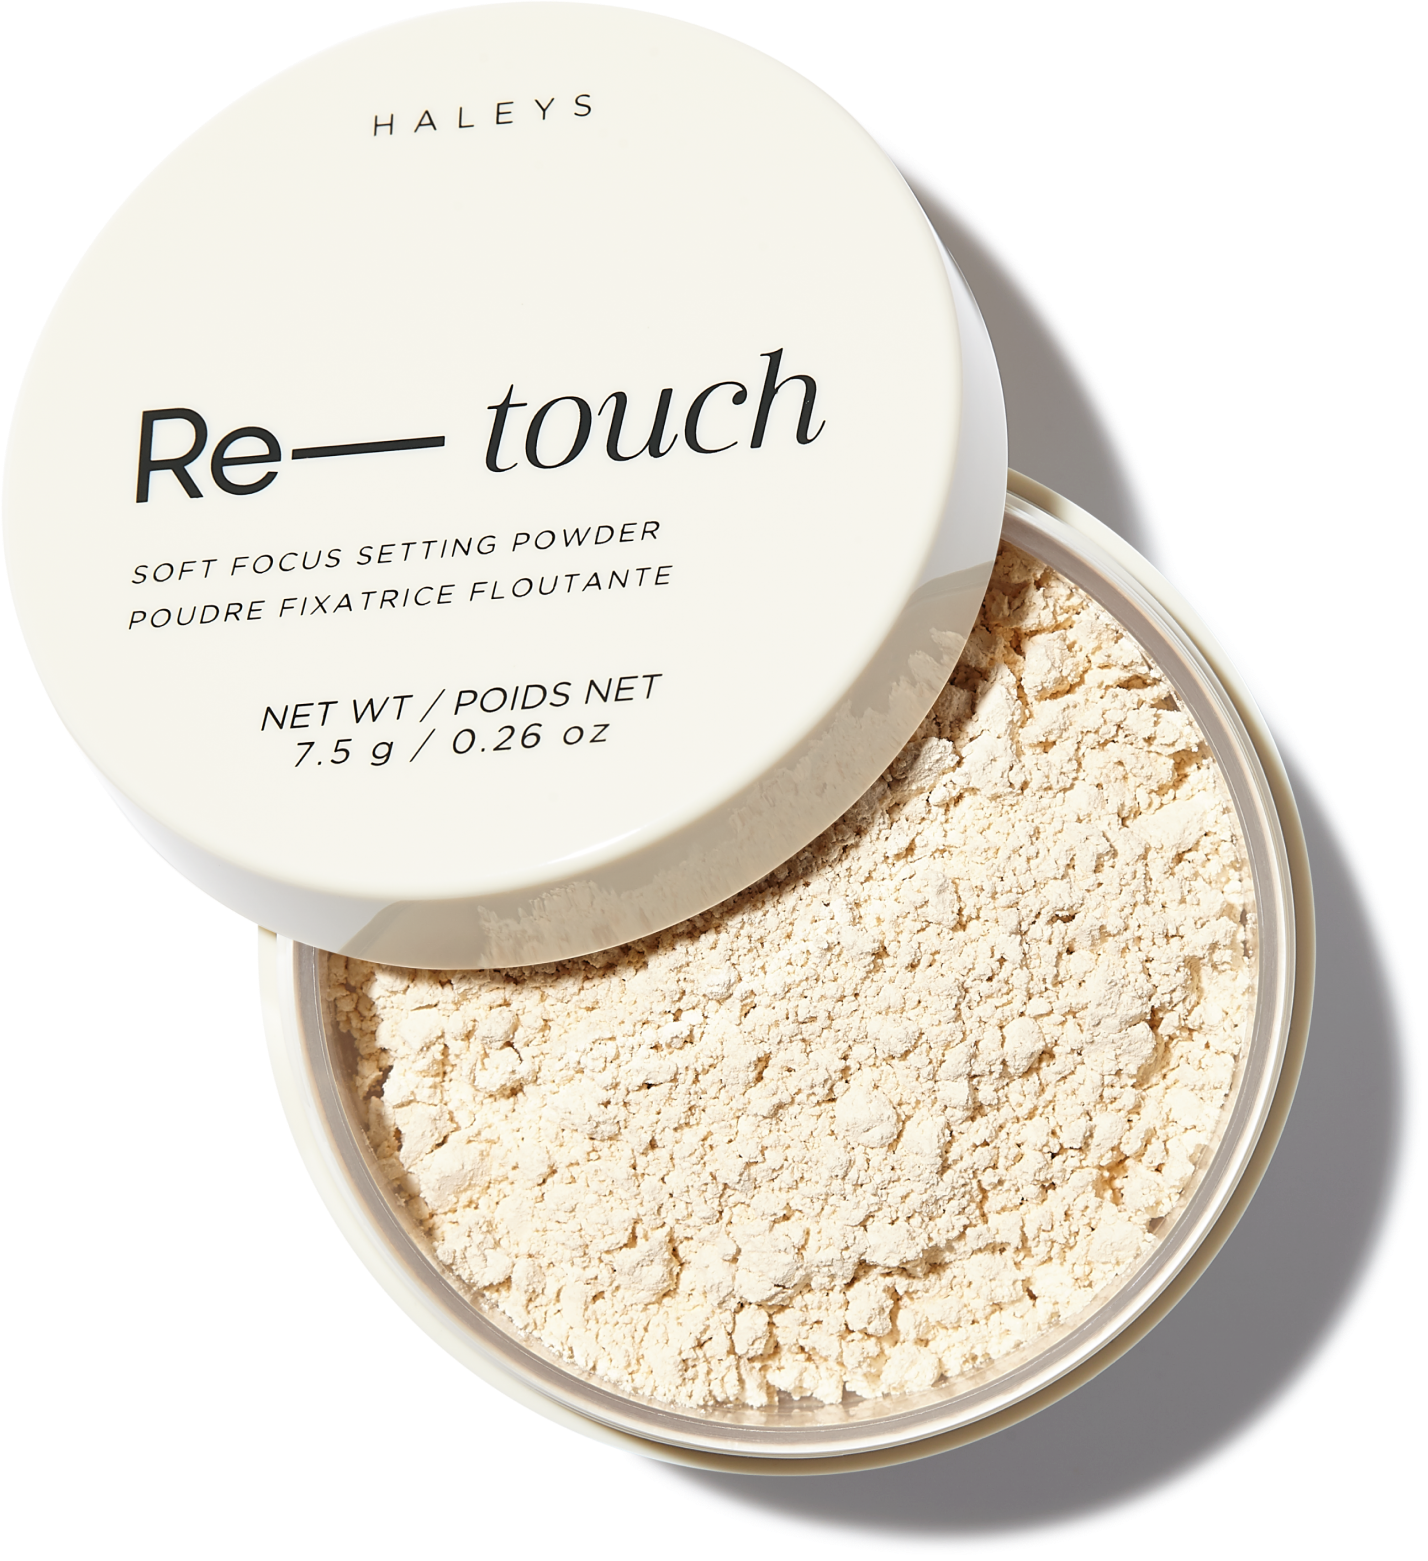 Re-touch Soft Focus Setting Powder